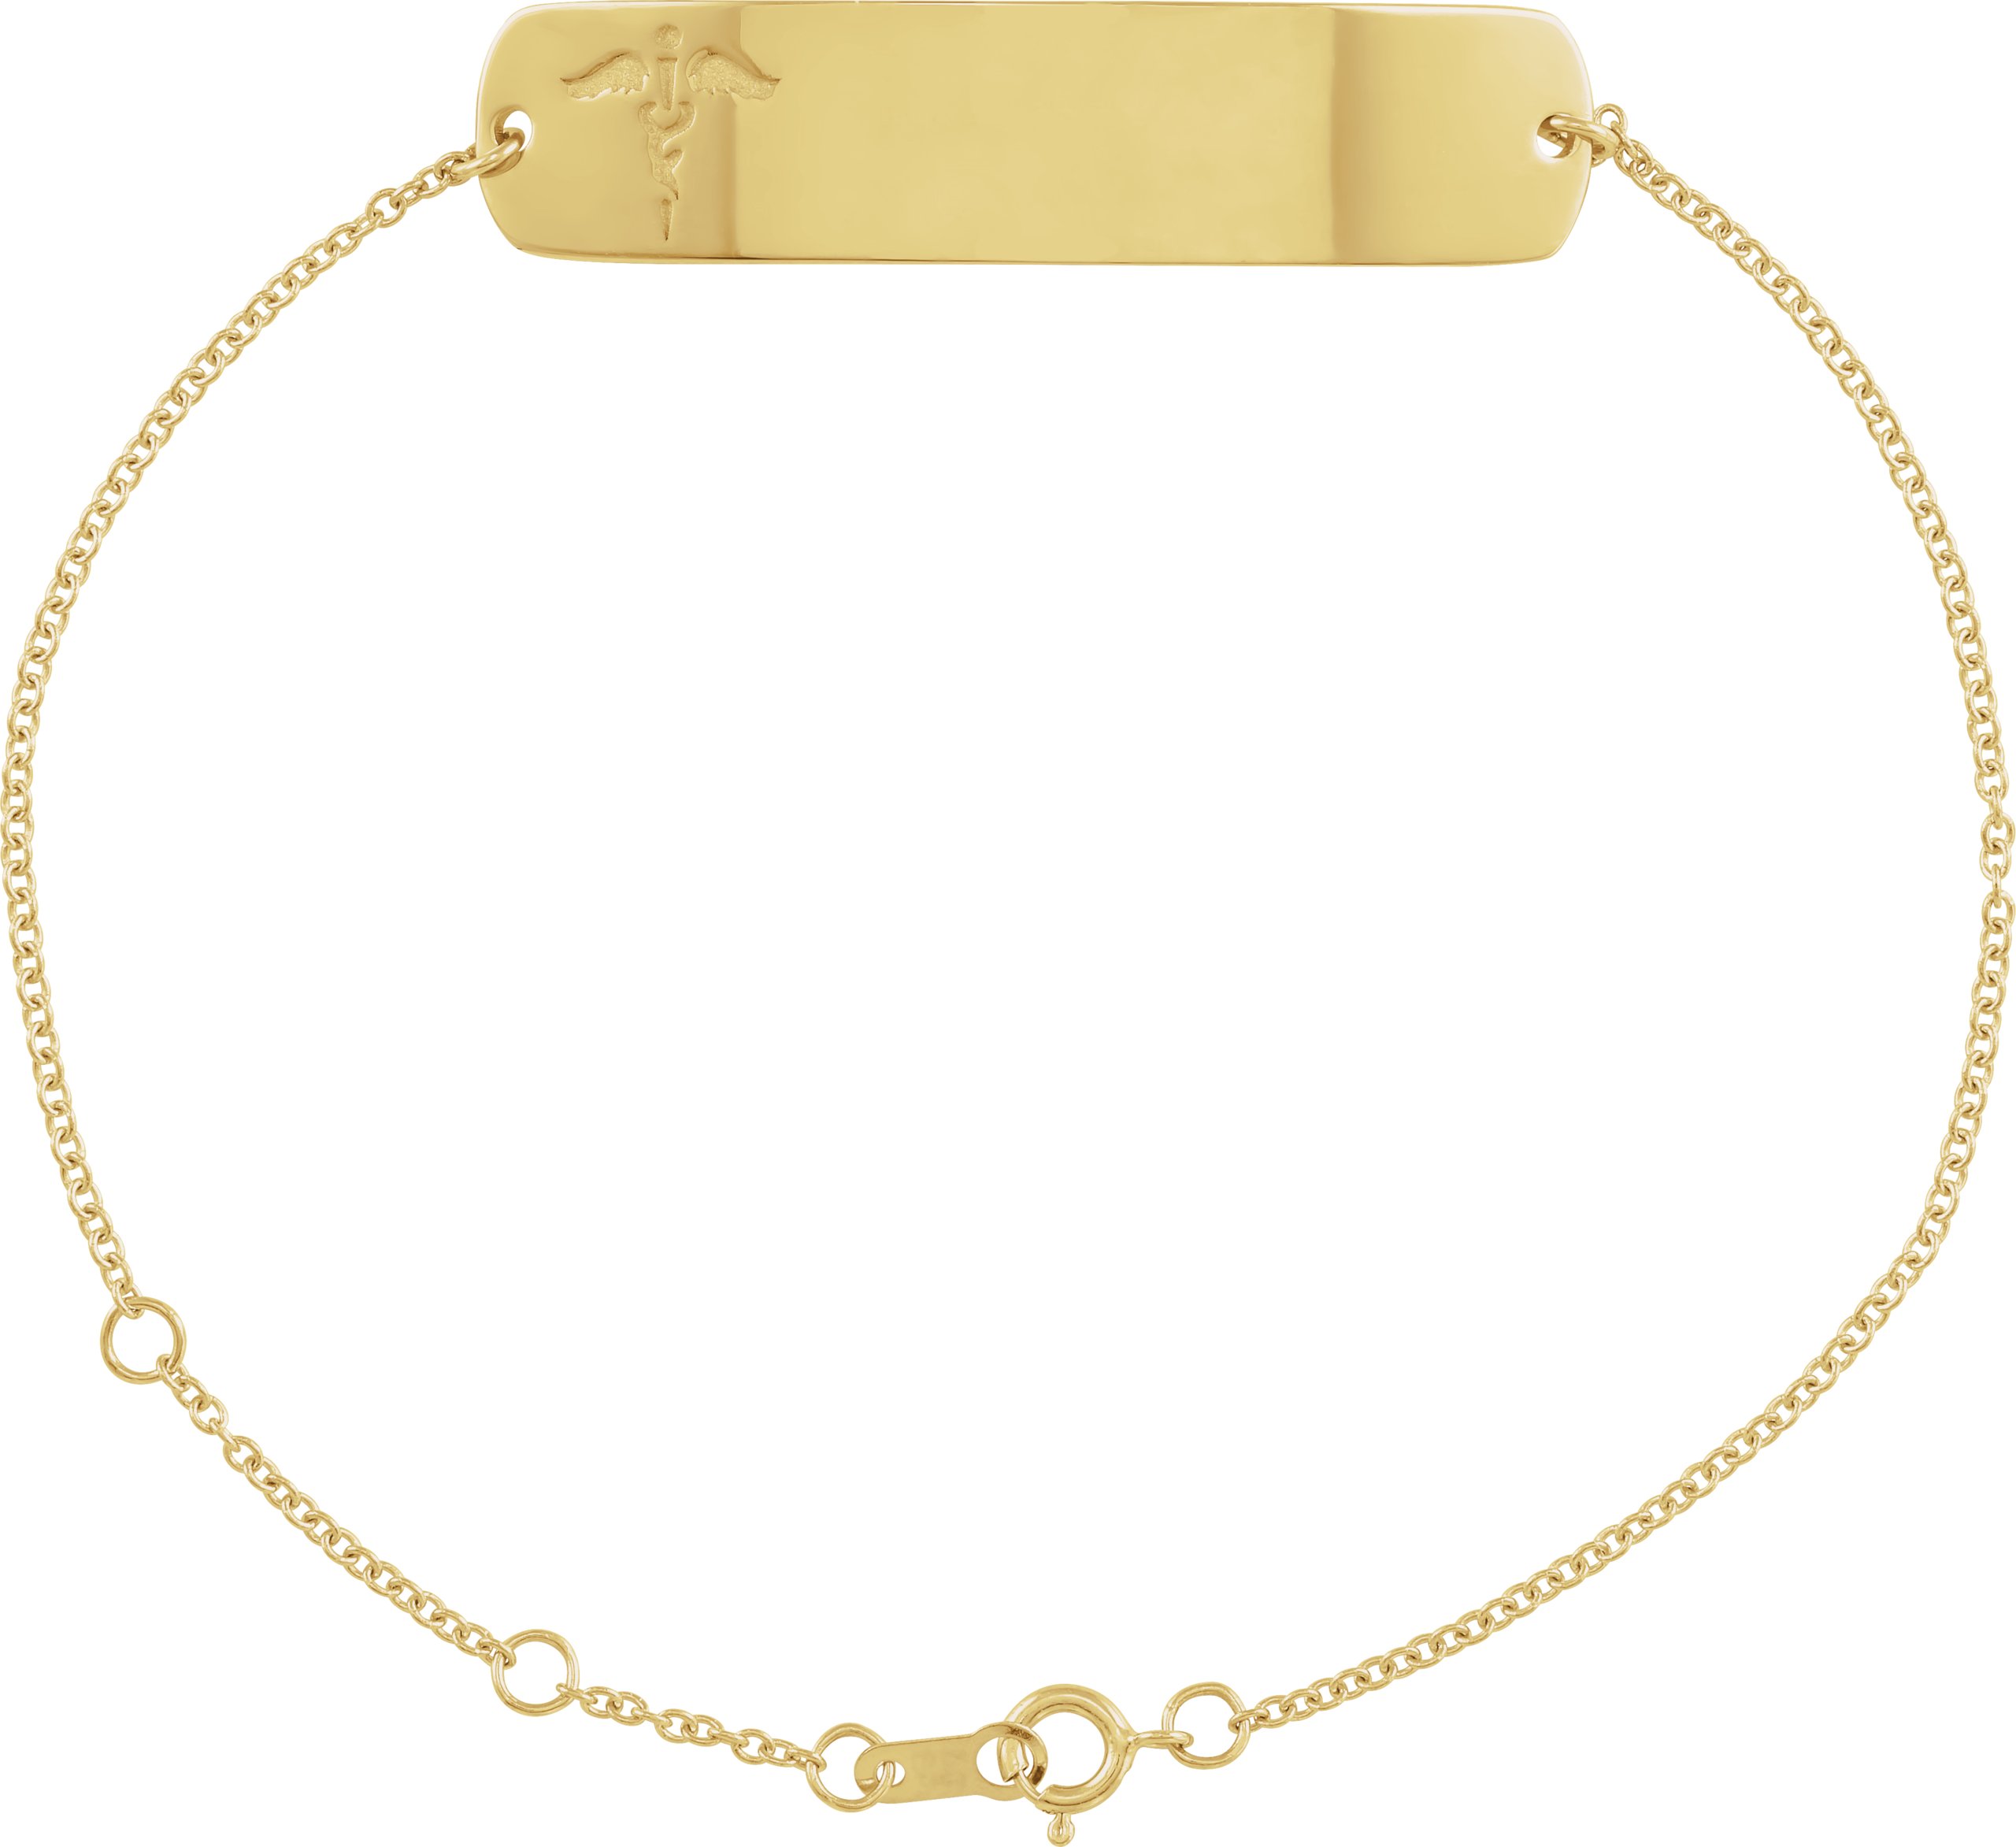 18K Yellow Gold-Plated Sterling Silver Engravable Medical Identification 6 1/2-7 1/2" Bracelet